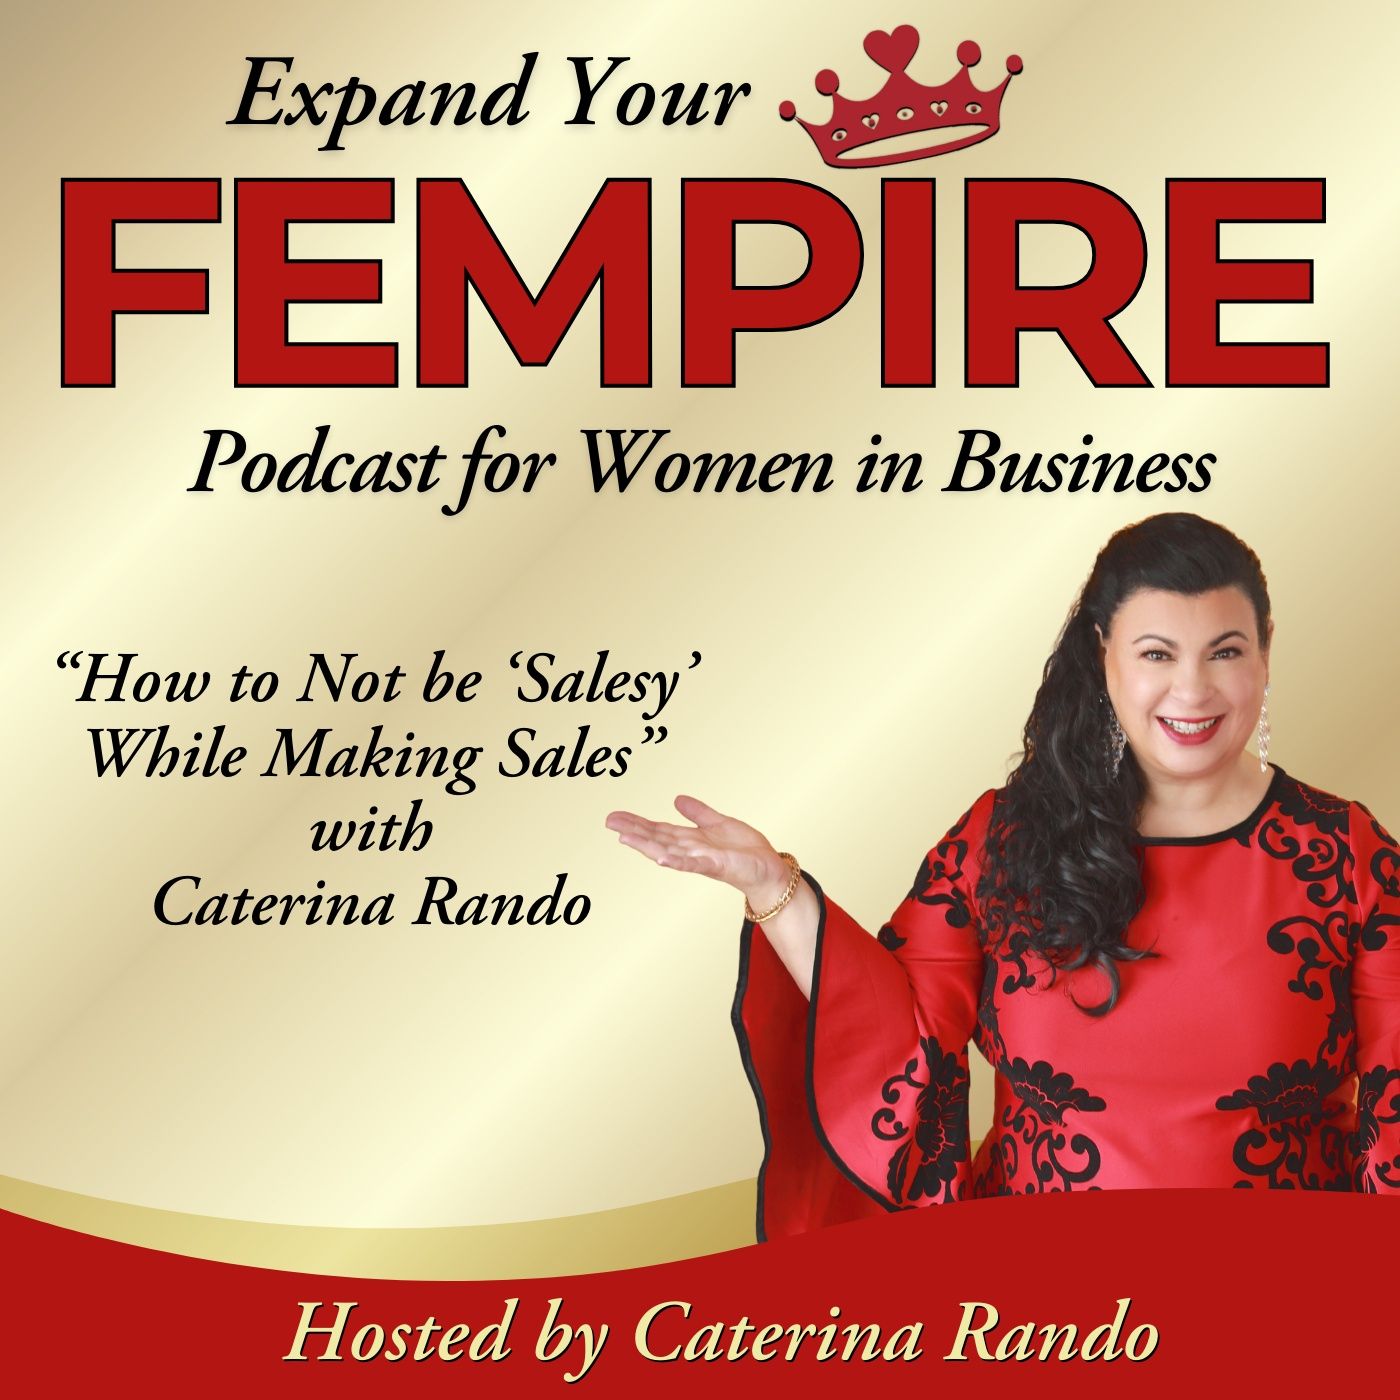 How to Not be “Salesy” While Making Sales with Caterina Rando